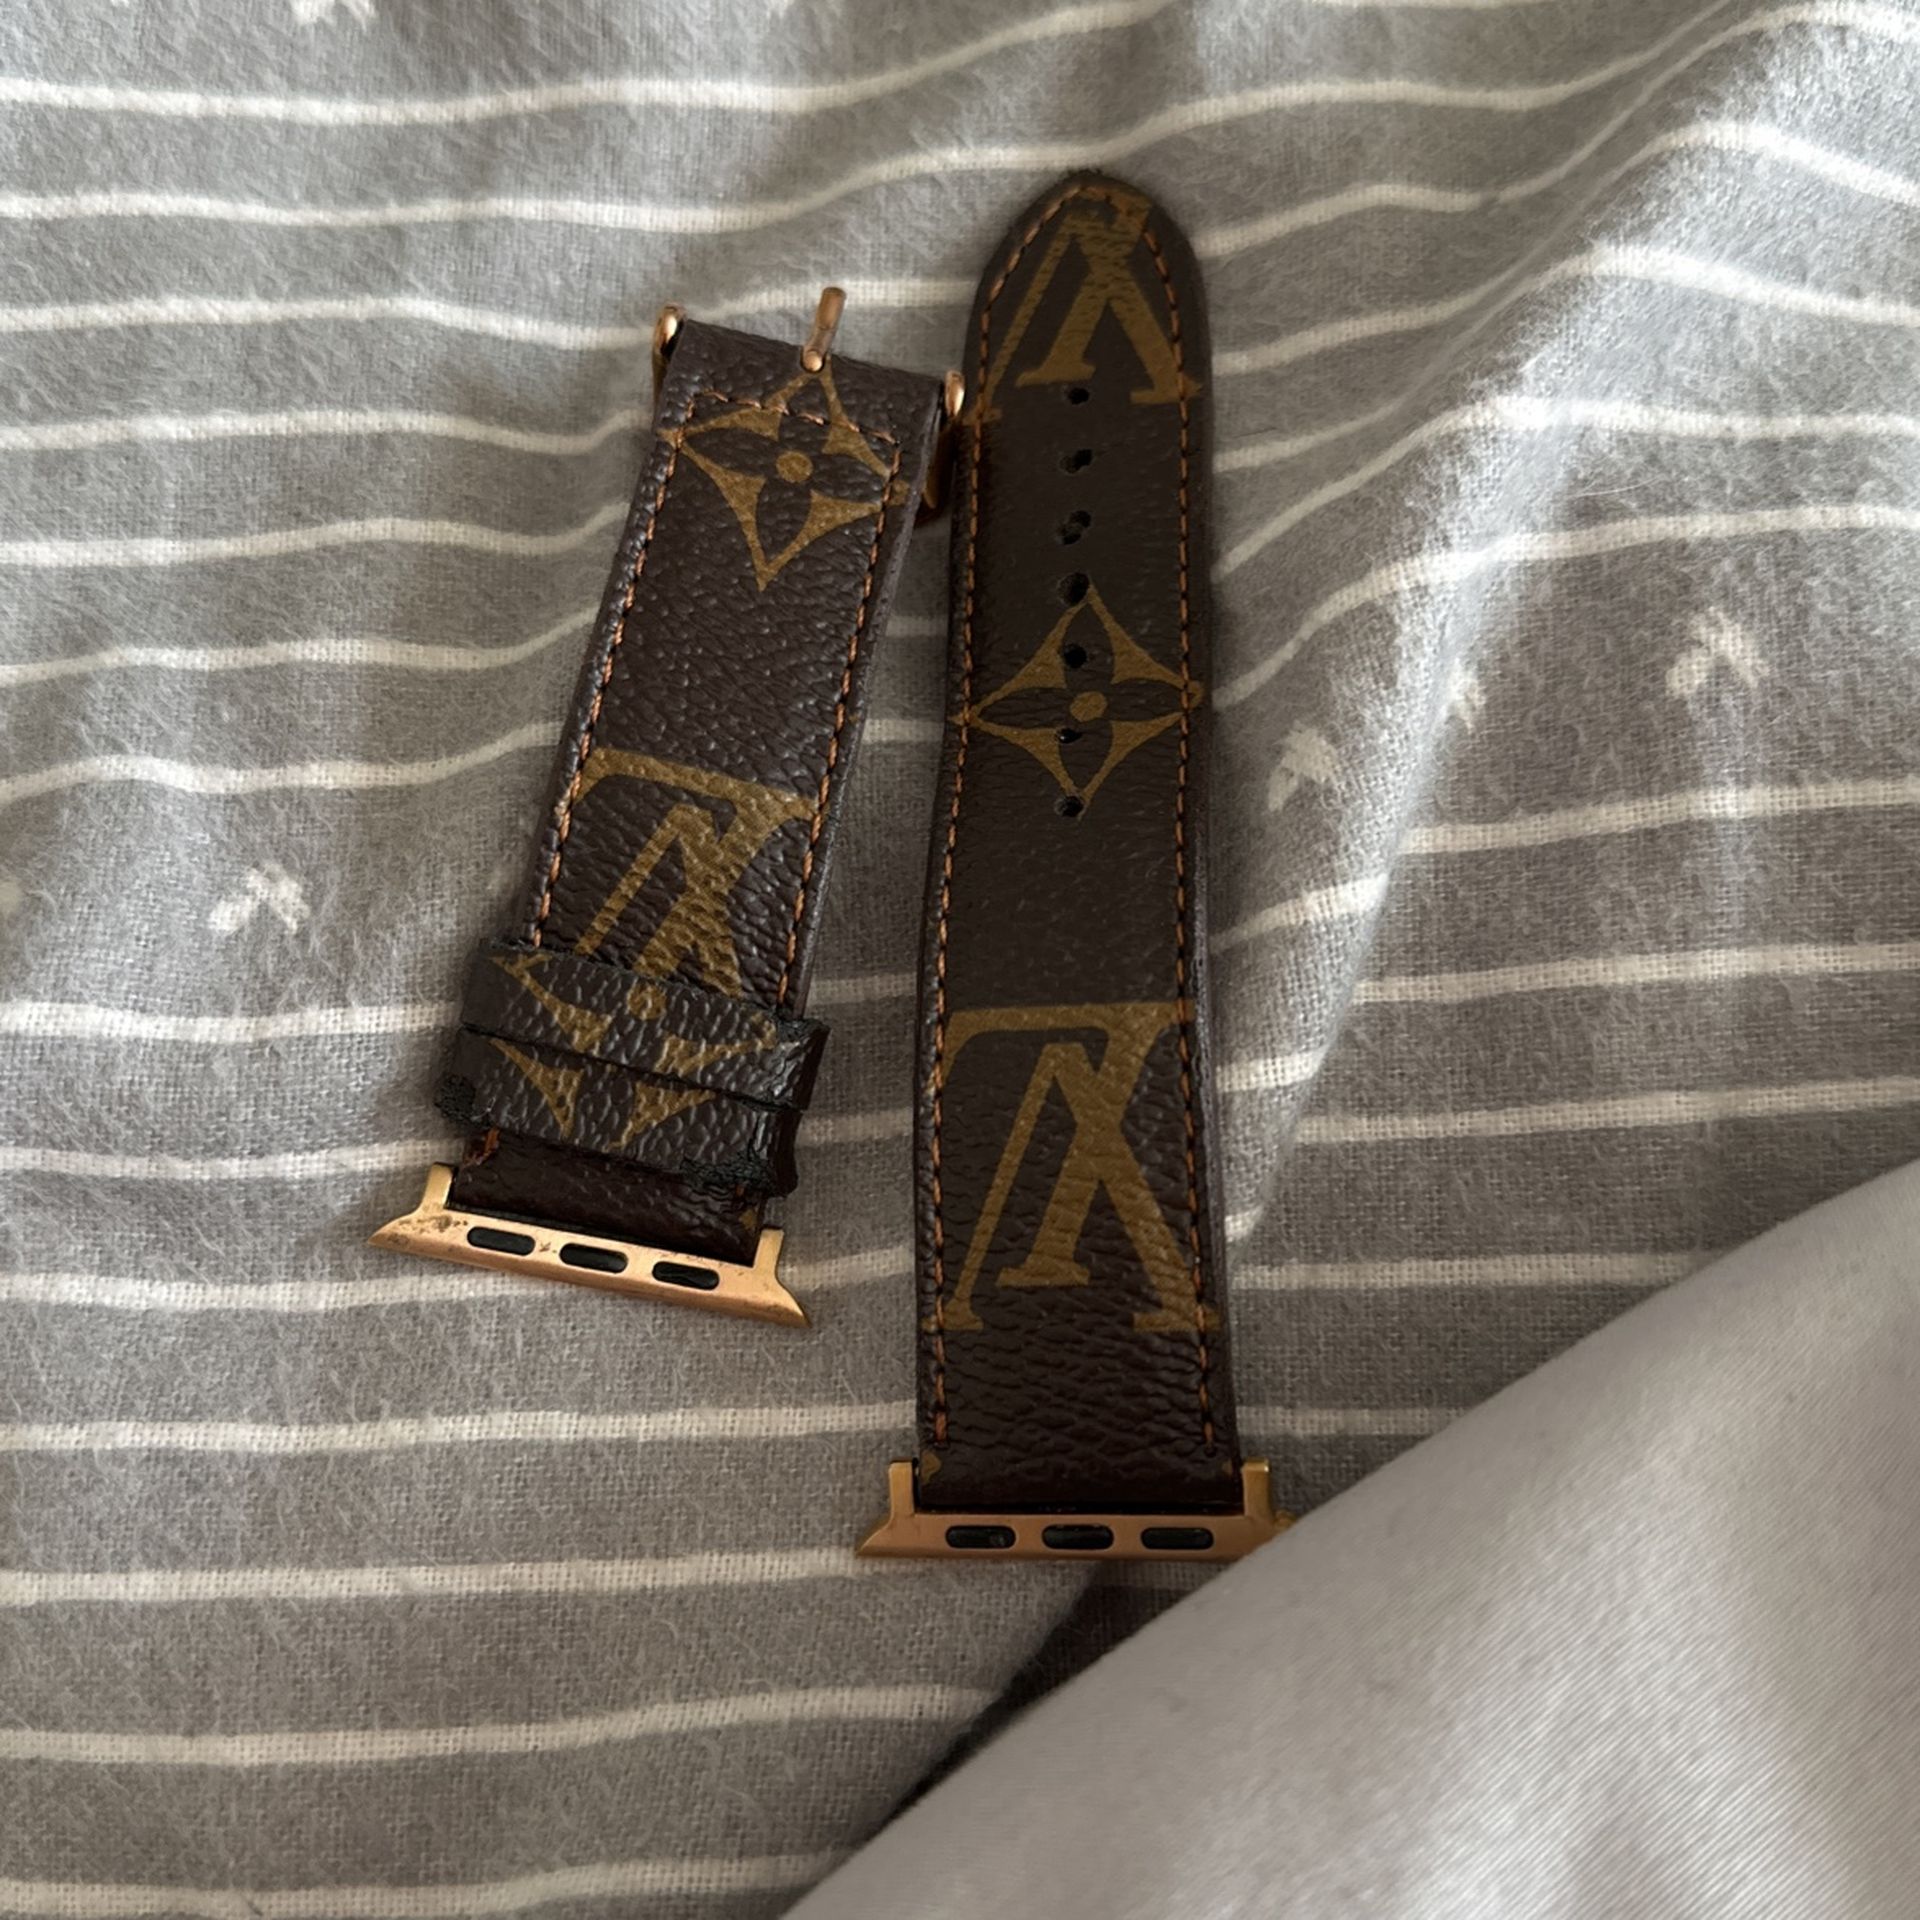 LV Apple Watch Band for Sale in Temecula, CA - OfferUp